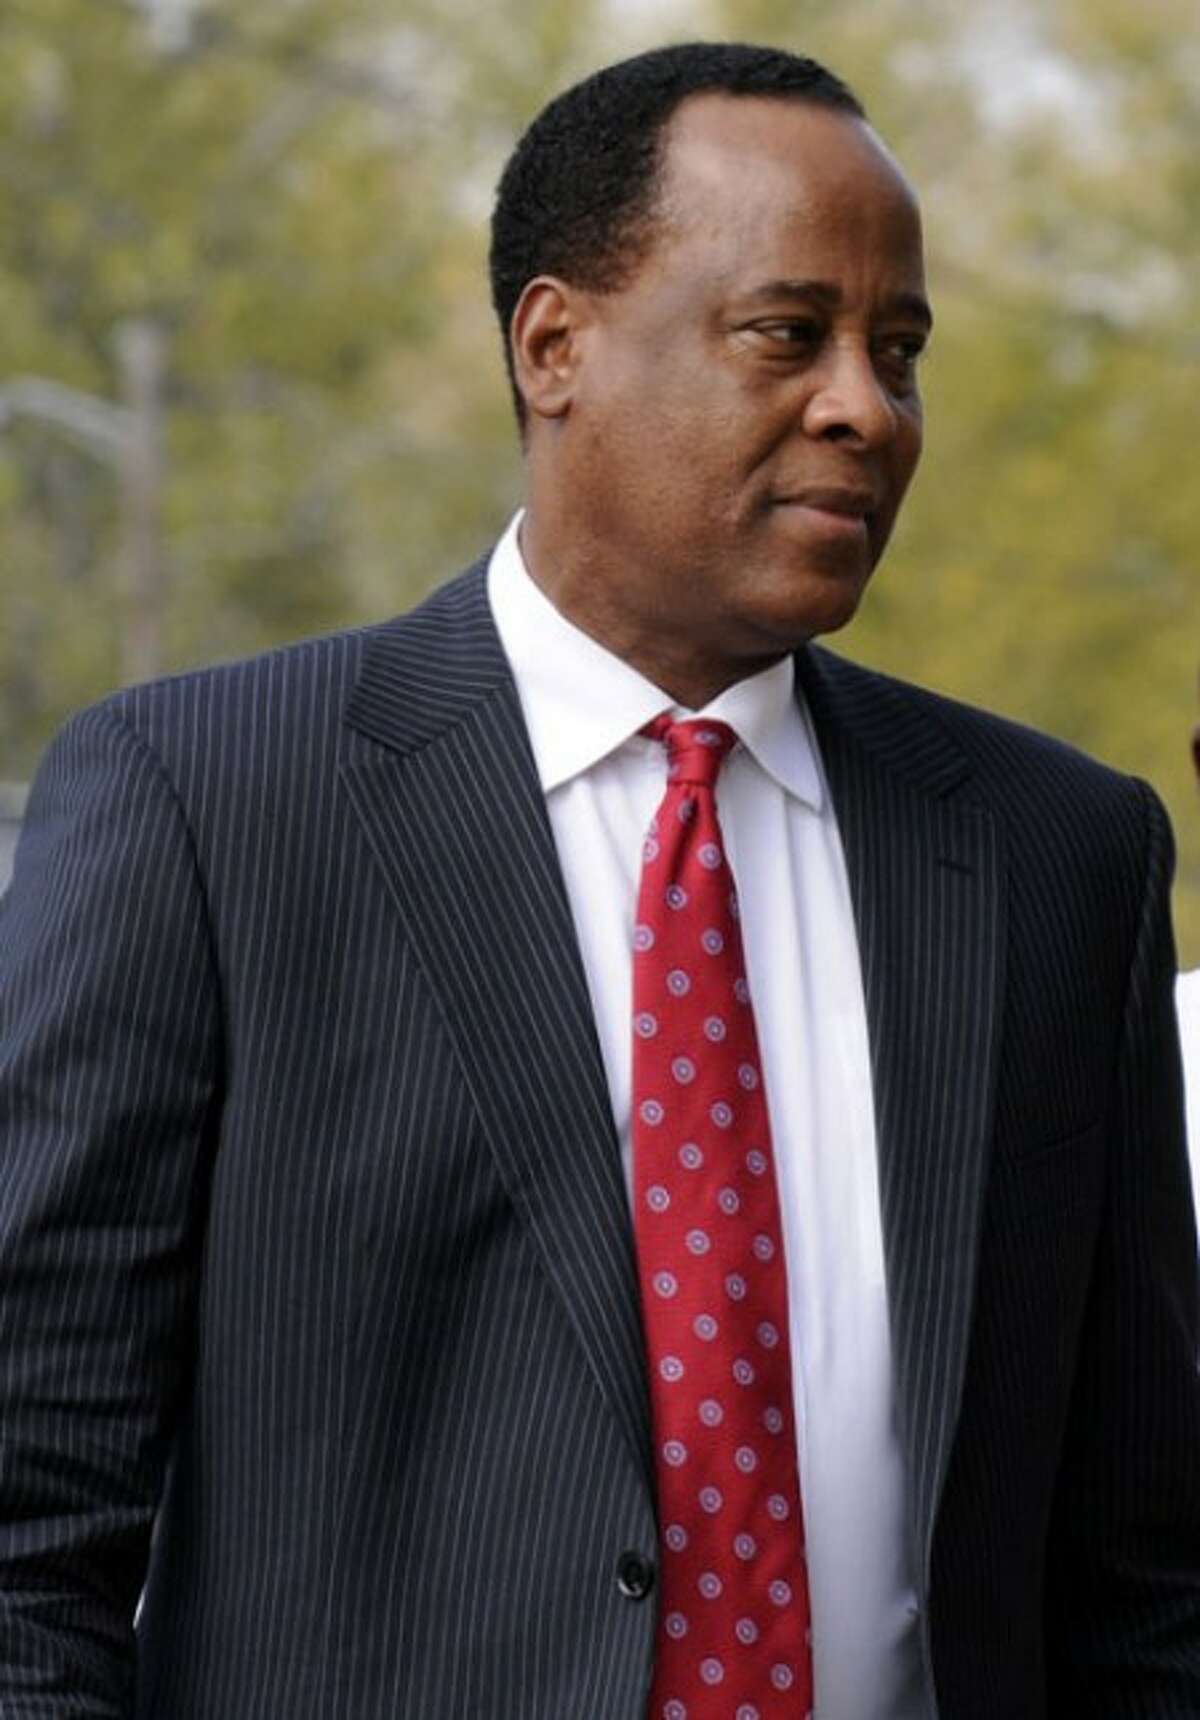 FILE - In this Nov. 23, 2009 file picture, Dr. Conrad Murray arrives at his clinic in Houston. Michael Jackson''s physician has arrived in Los Angeles in anticipation of a decision from the district attorney''s office on whether to charge him for the singer''s death, a spokeswoman said Tuesday Feb. 2, 2010. (AP Photo/Pat Sullivan, File)